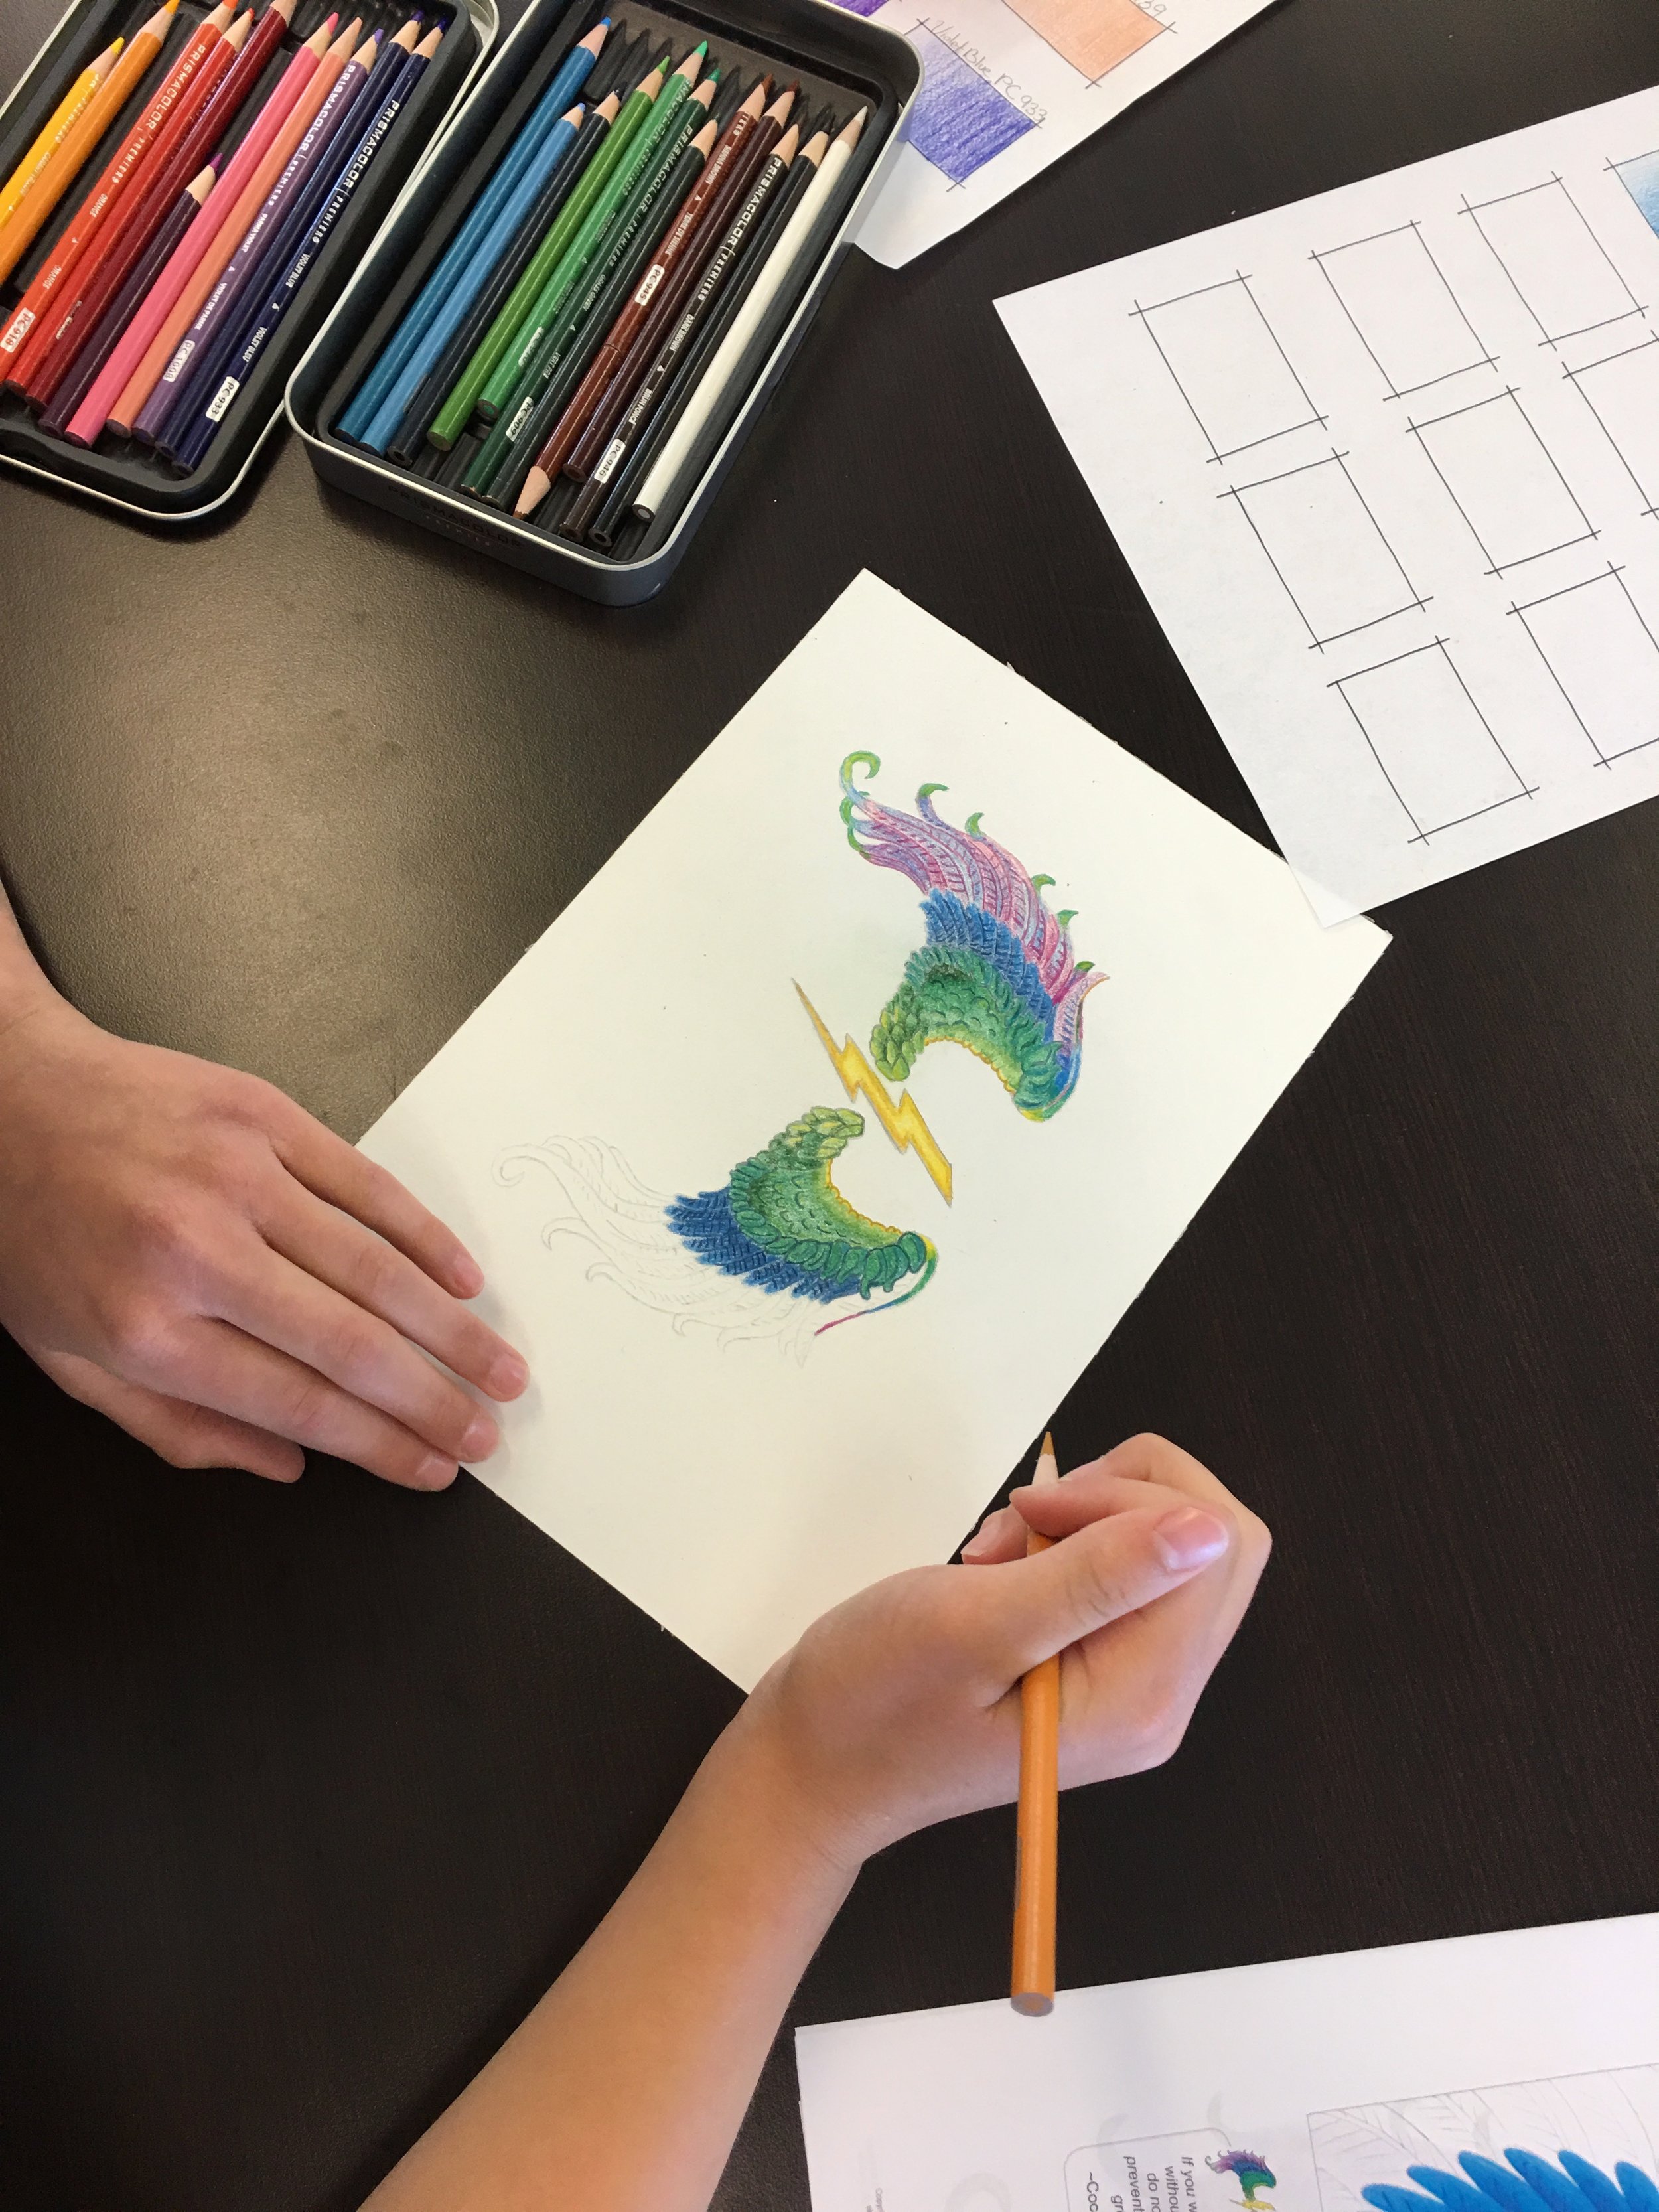 Highlights from the color pencils for kids camp — Cloud 9